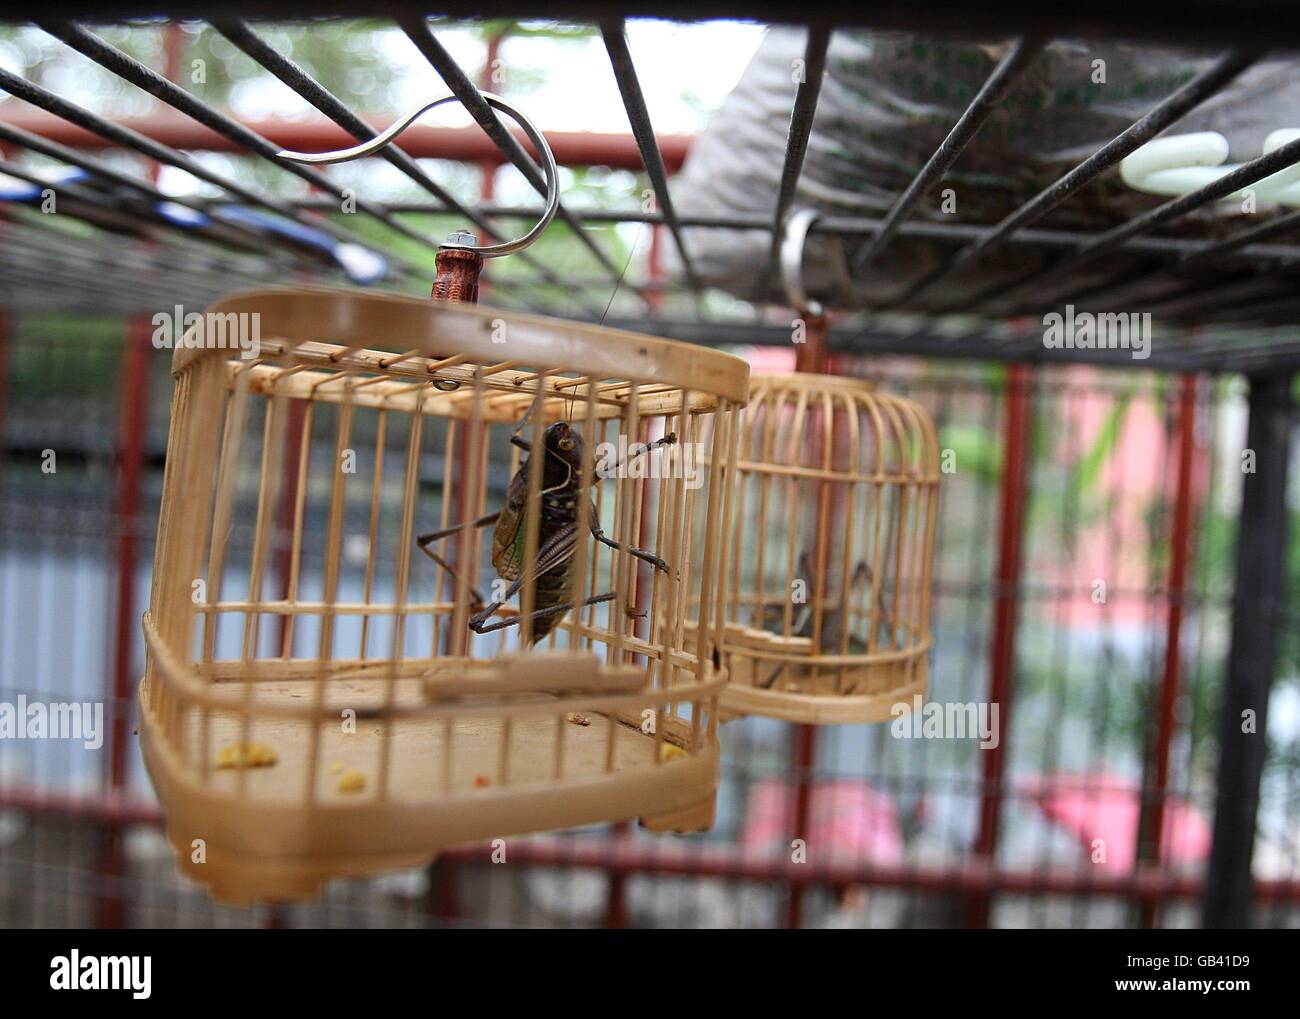 Olympics - Beijing Olympic Games 2008. Grasshoppers hanging in cages in Beijing, China. Stock Photo